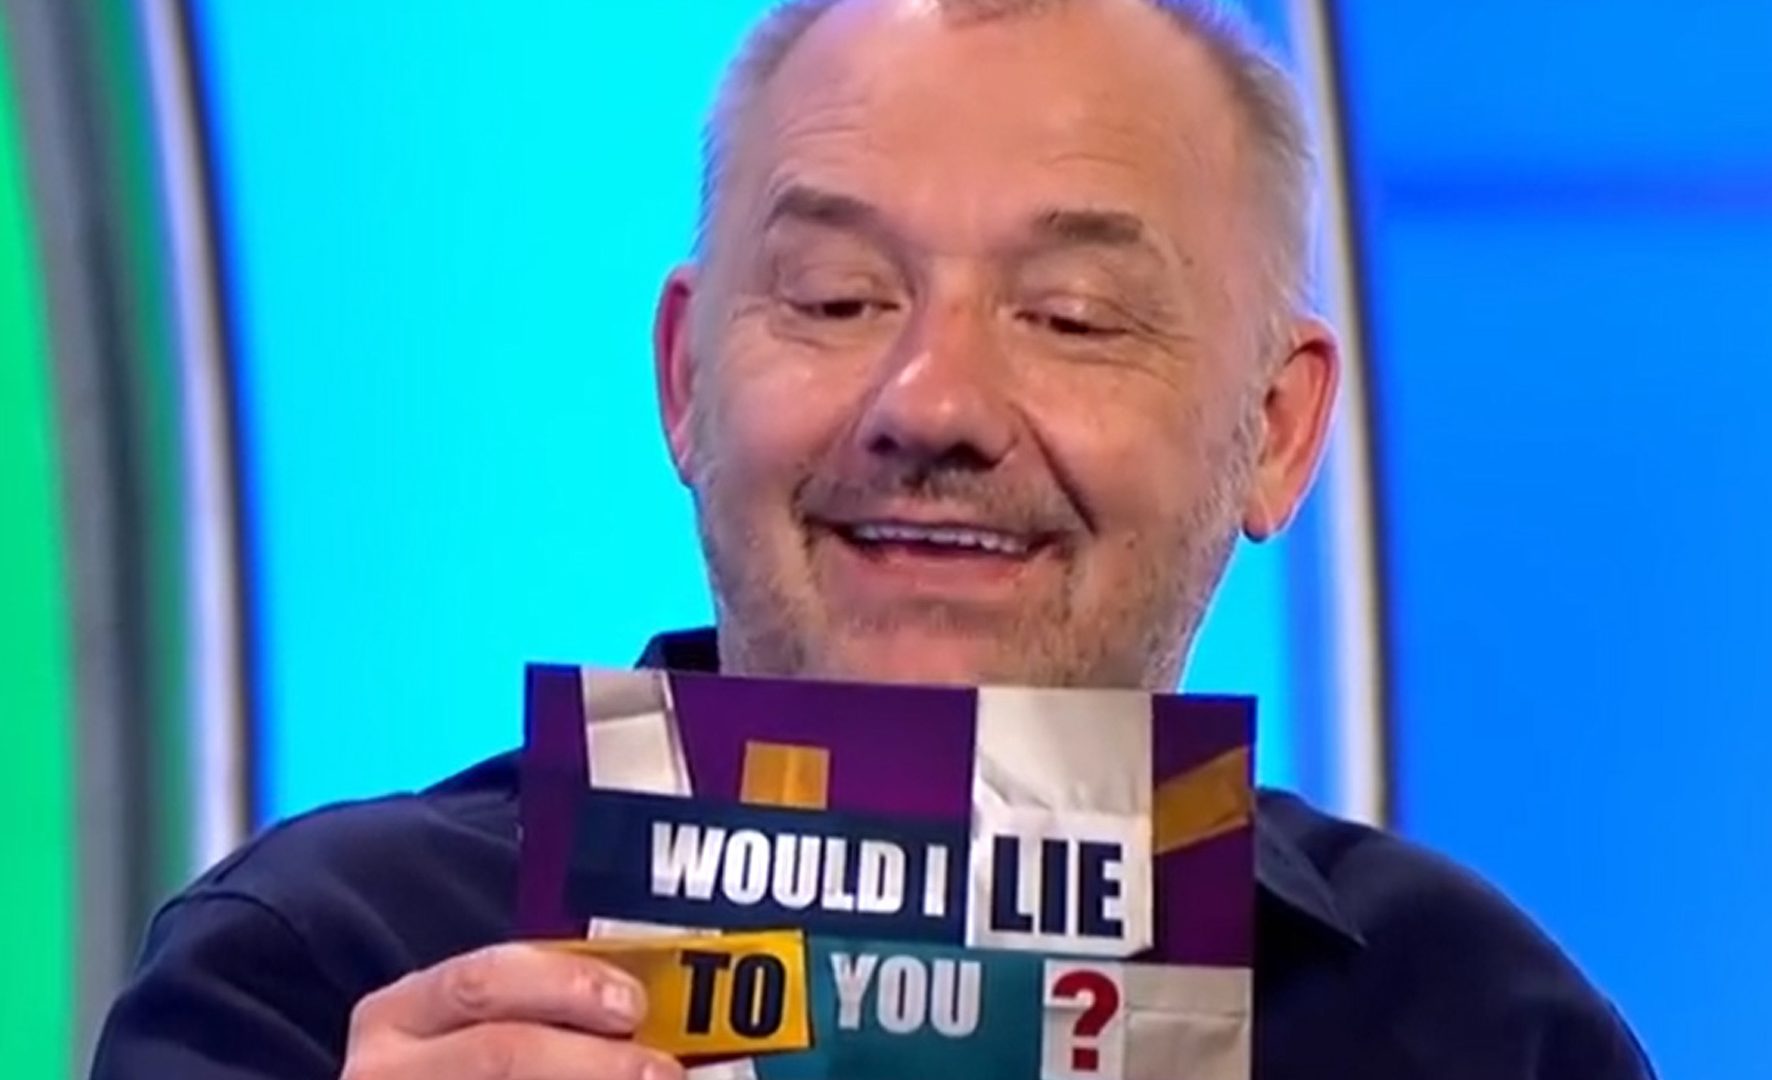 News: Watch Bob Mortimer On Would I Lie To You?